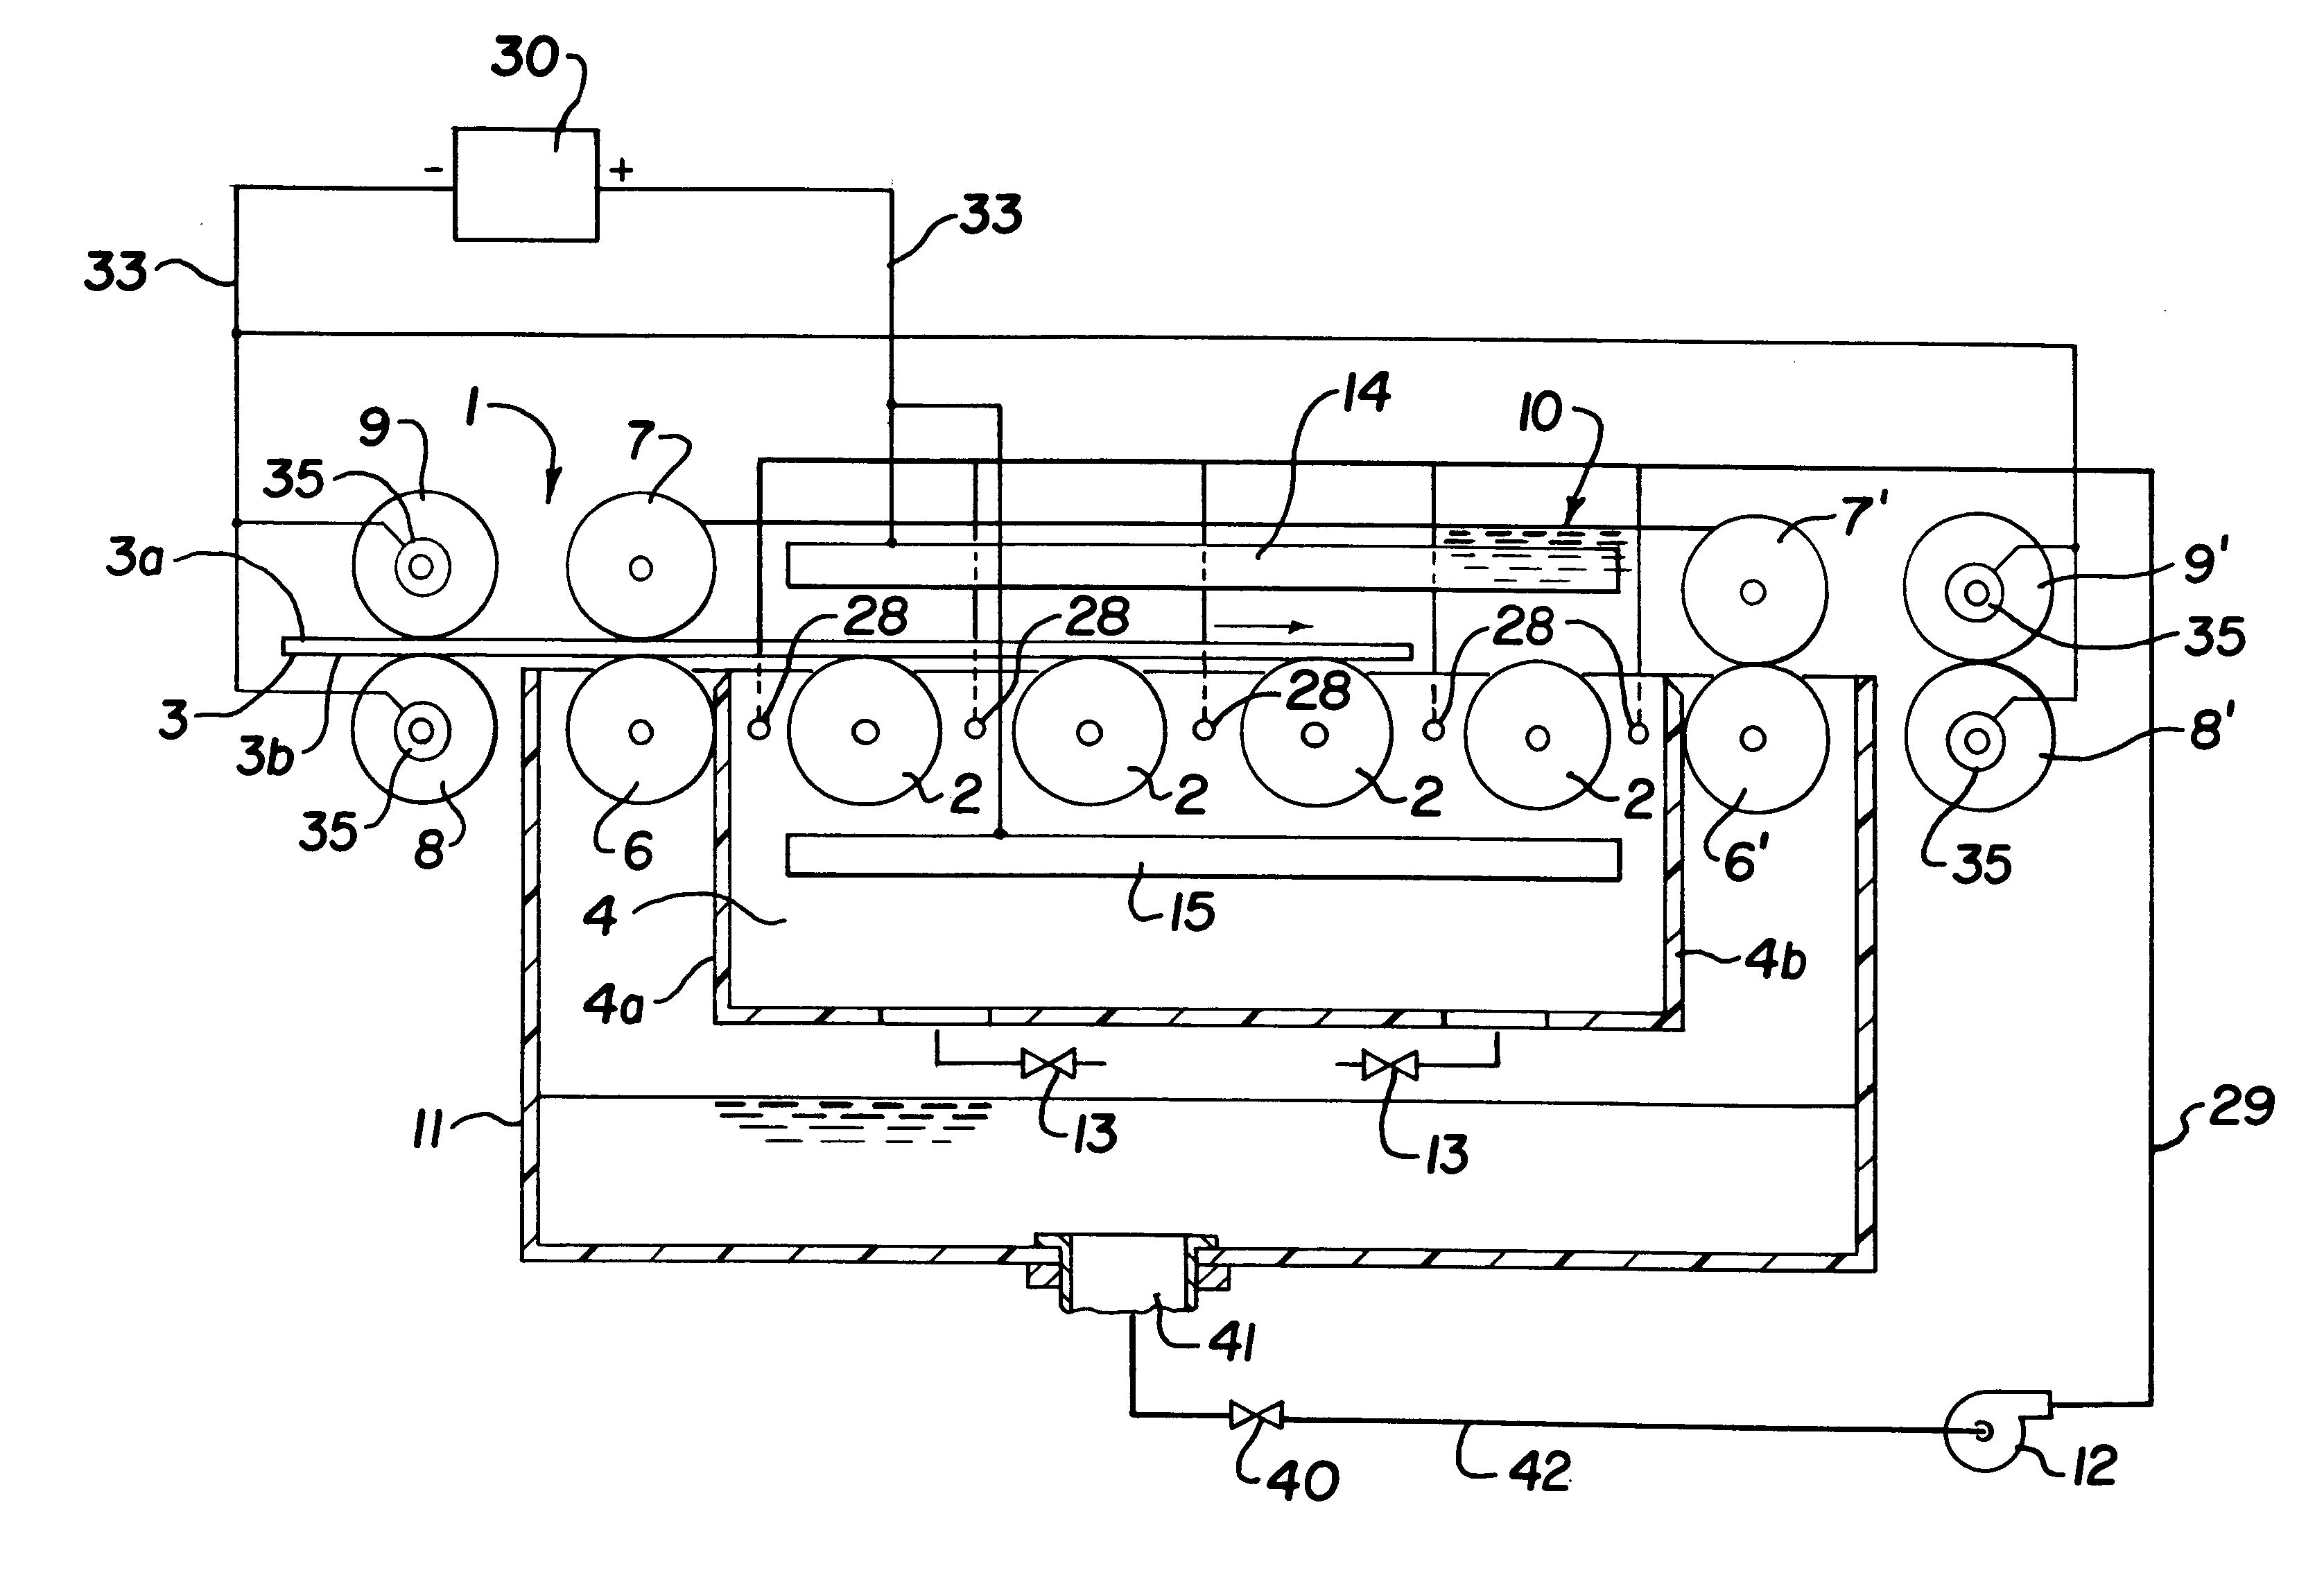 Apparatus for inline plating